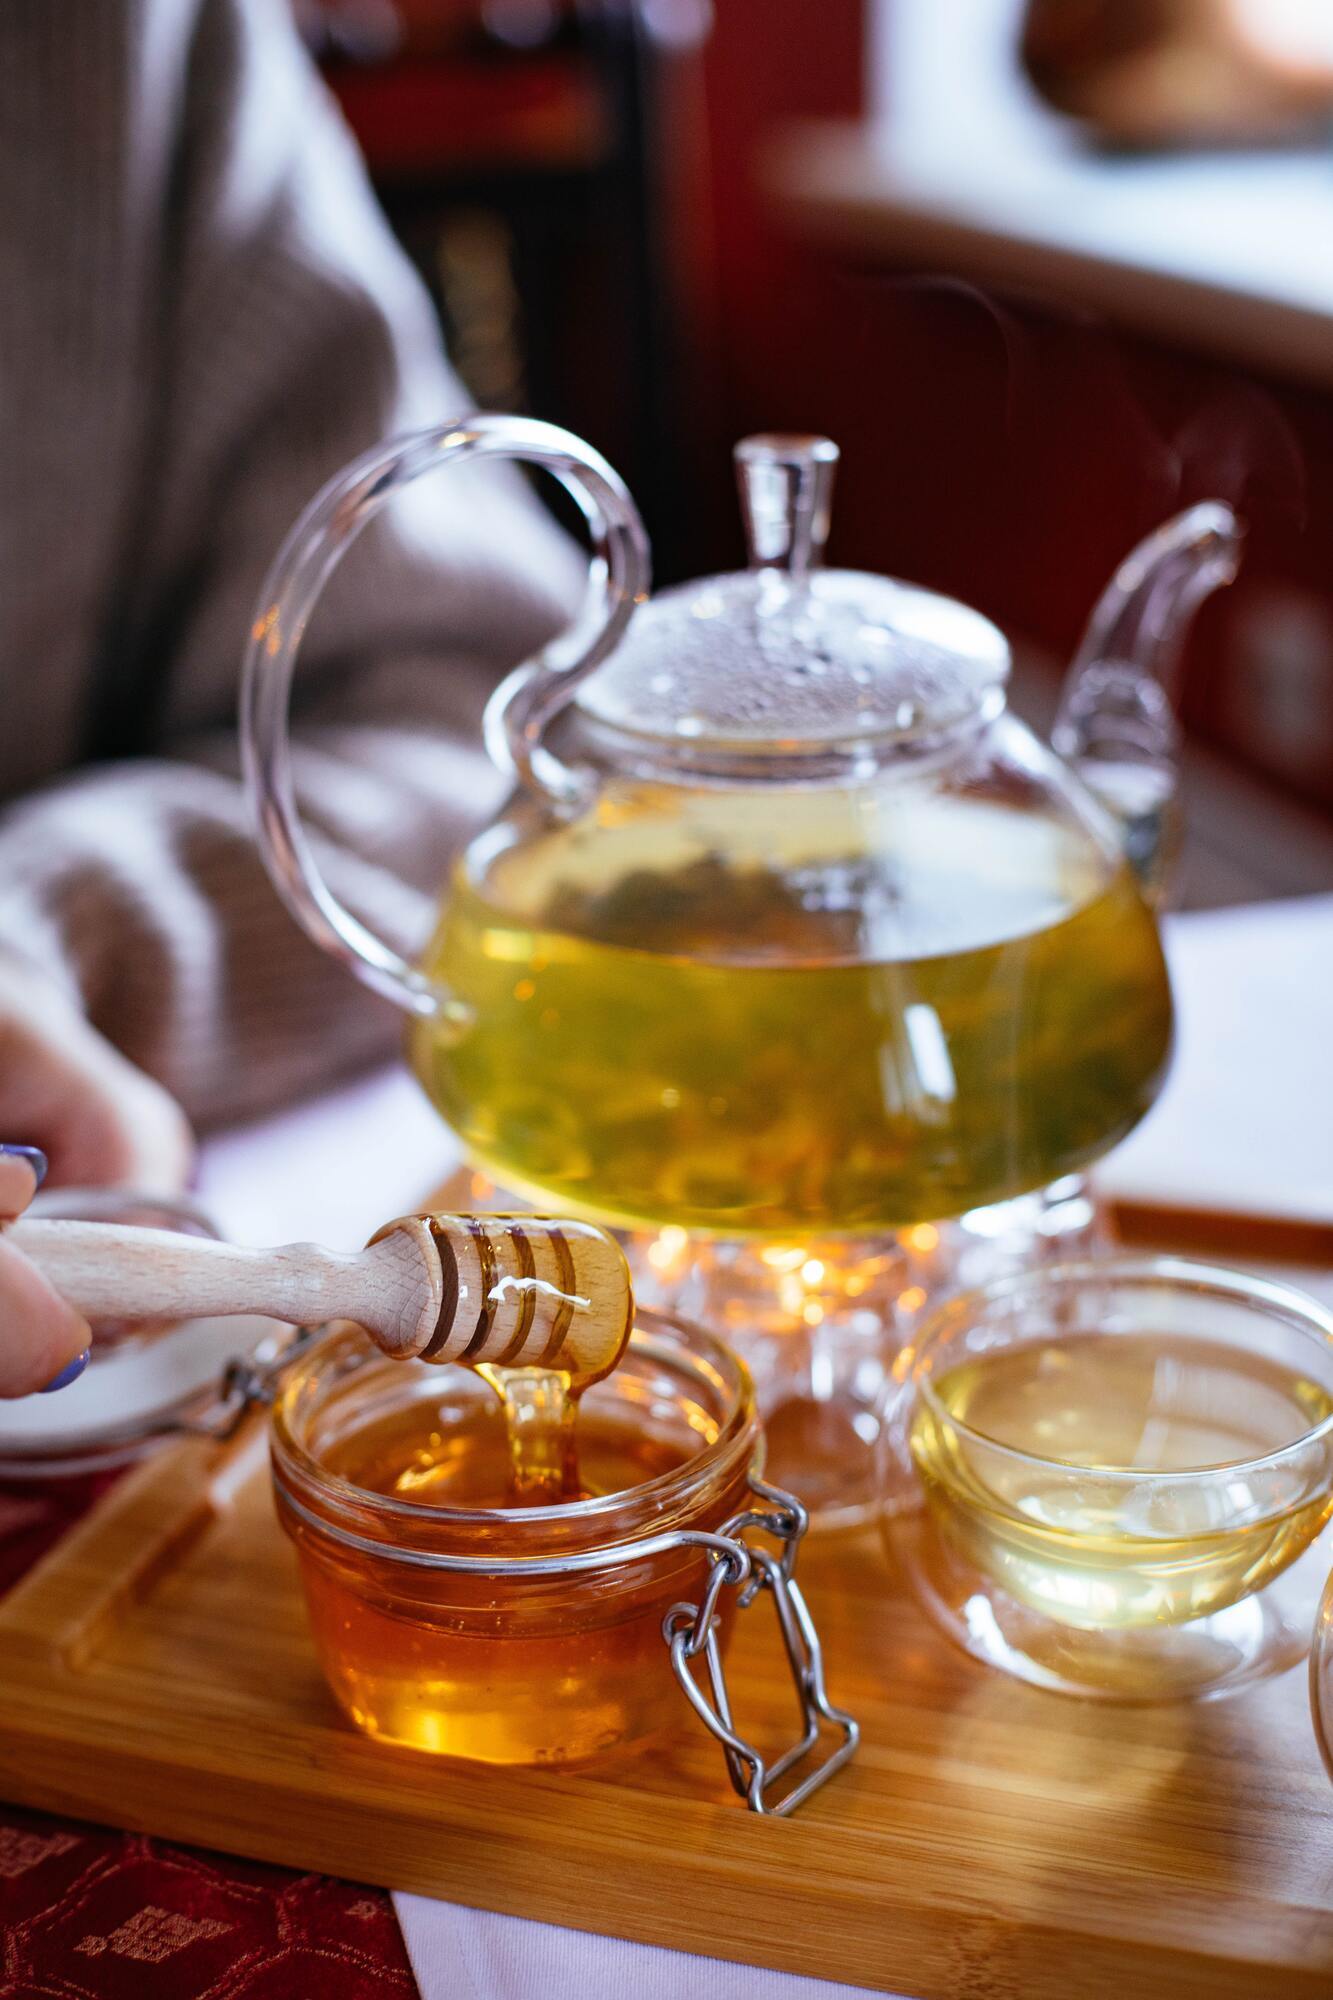 What tea can be harmful: it's best not to drink it